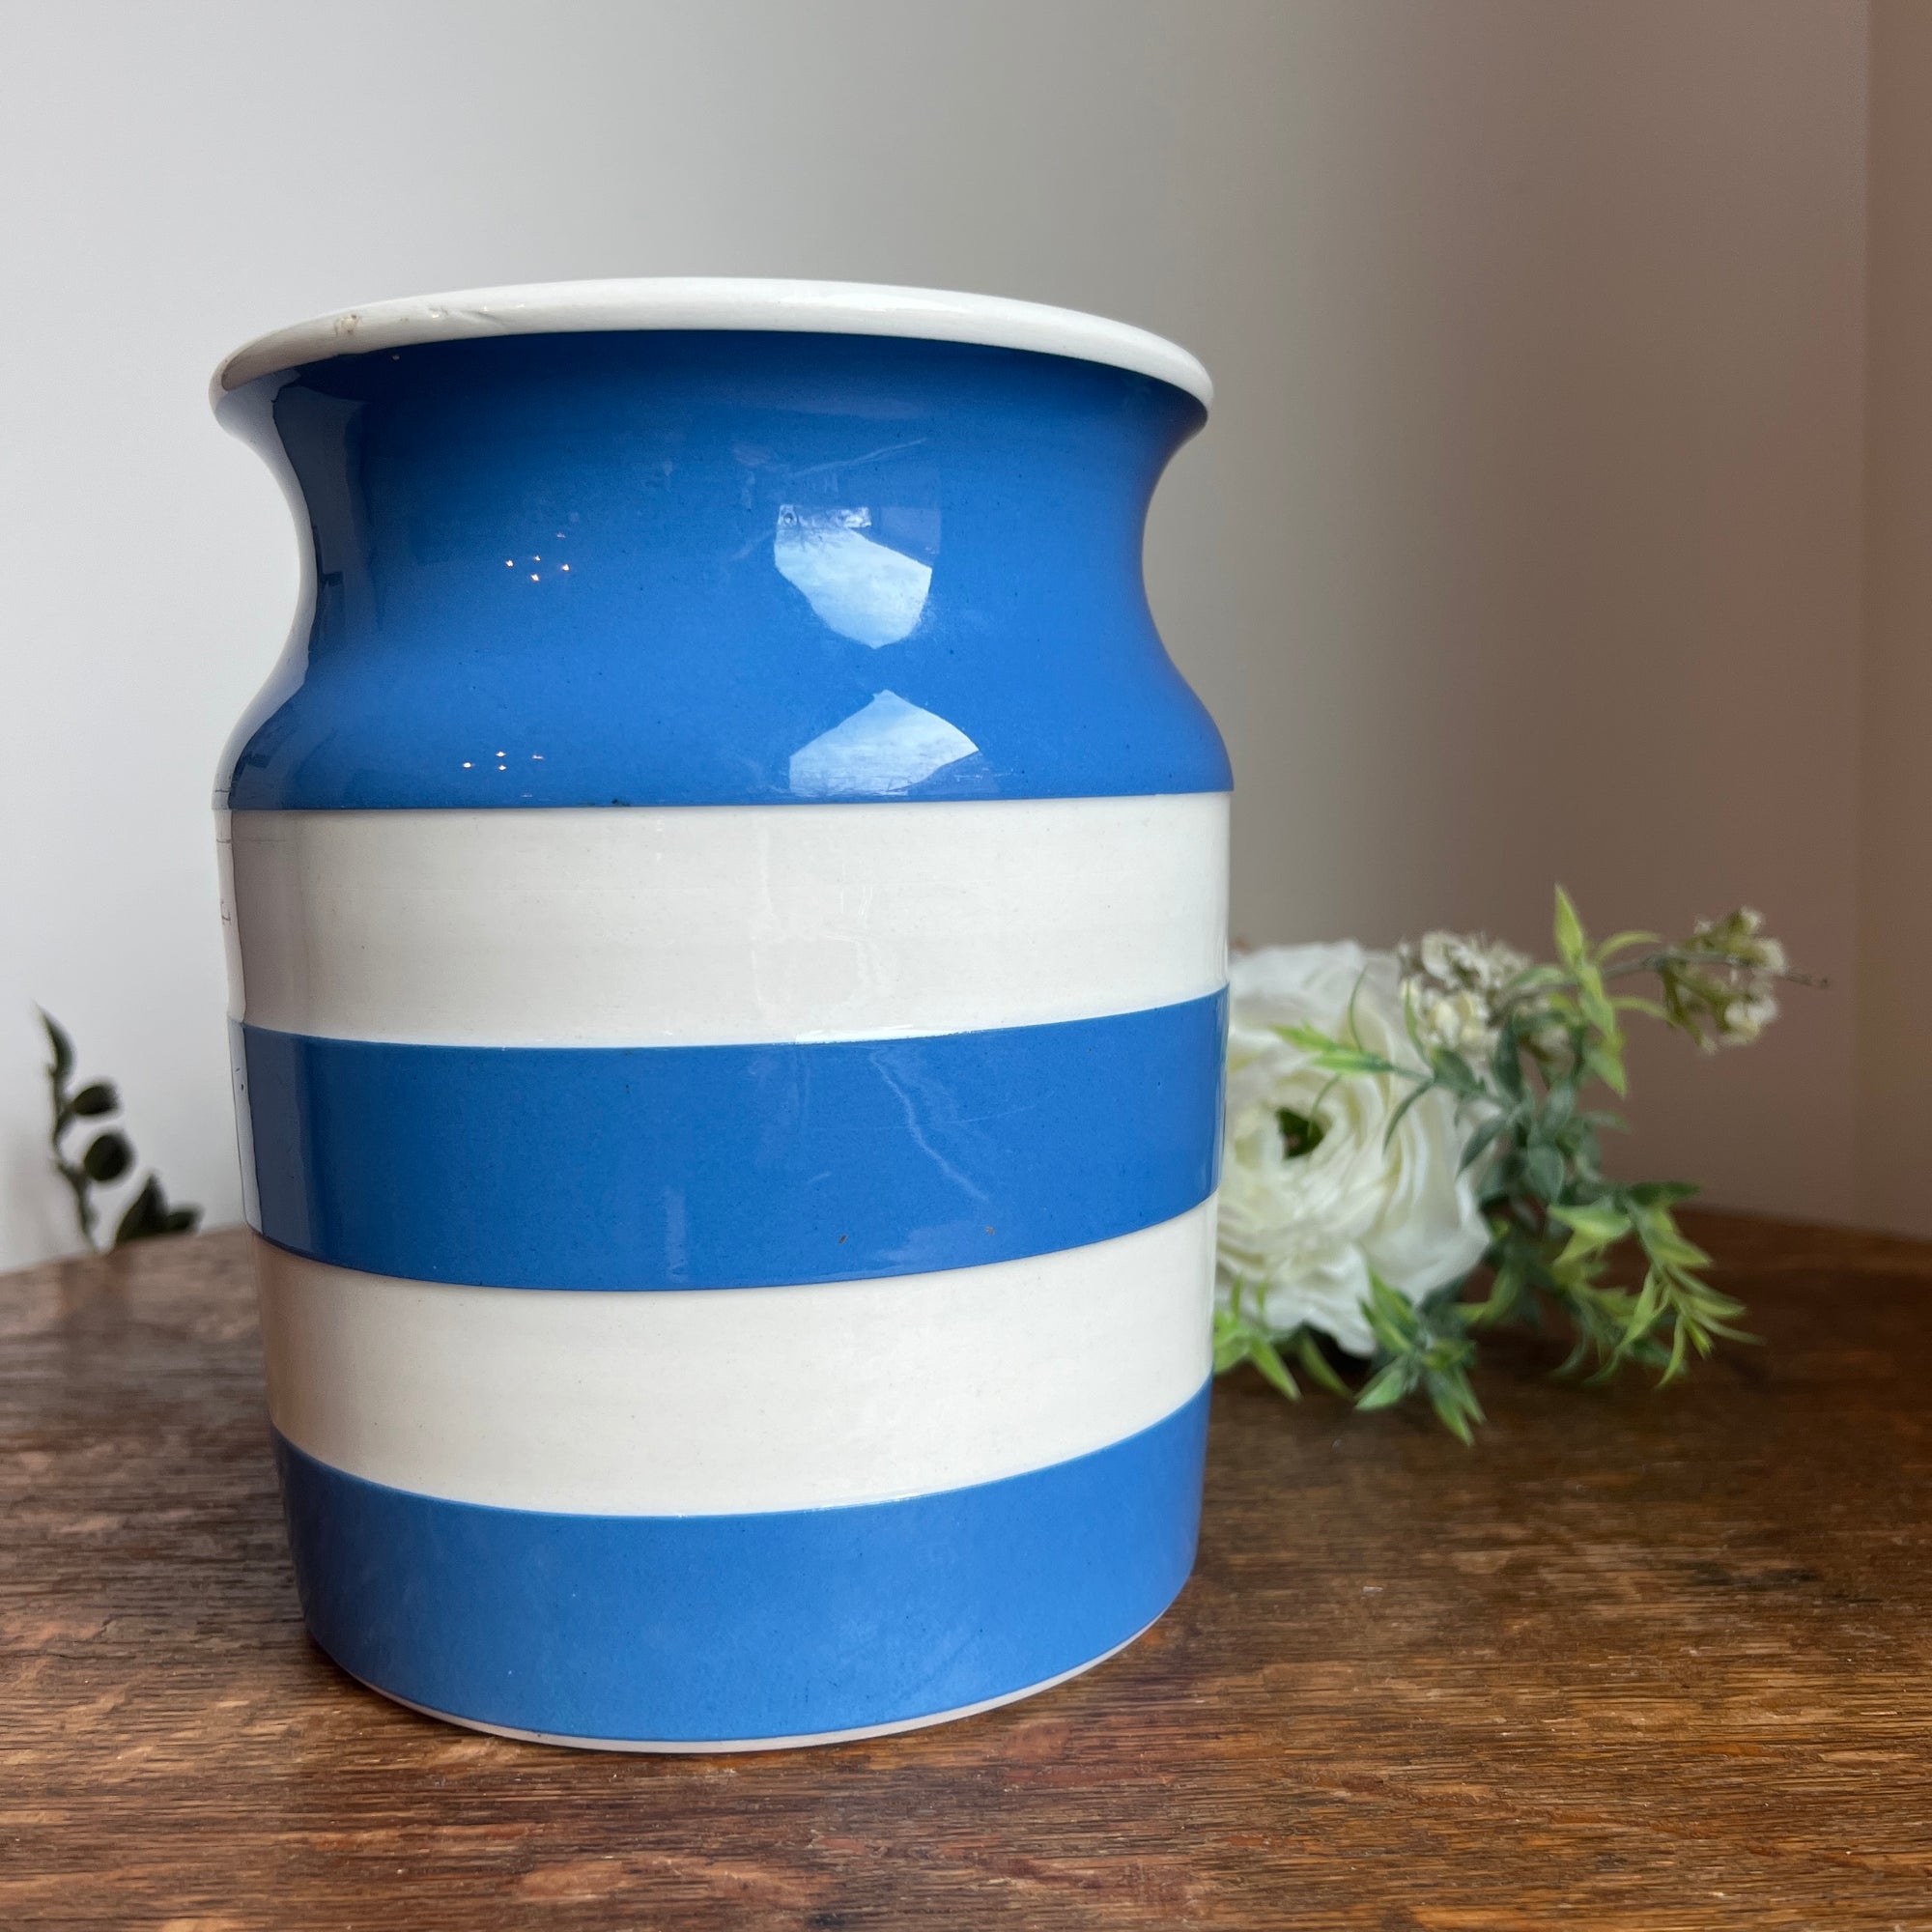 1930's-50's T.G. Green Cornishware SUGAR Canister